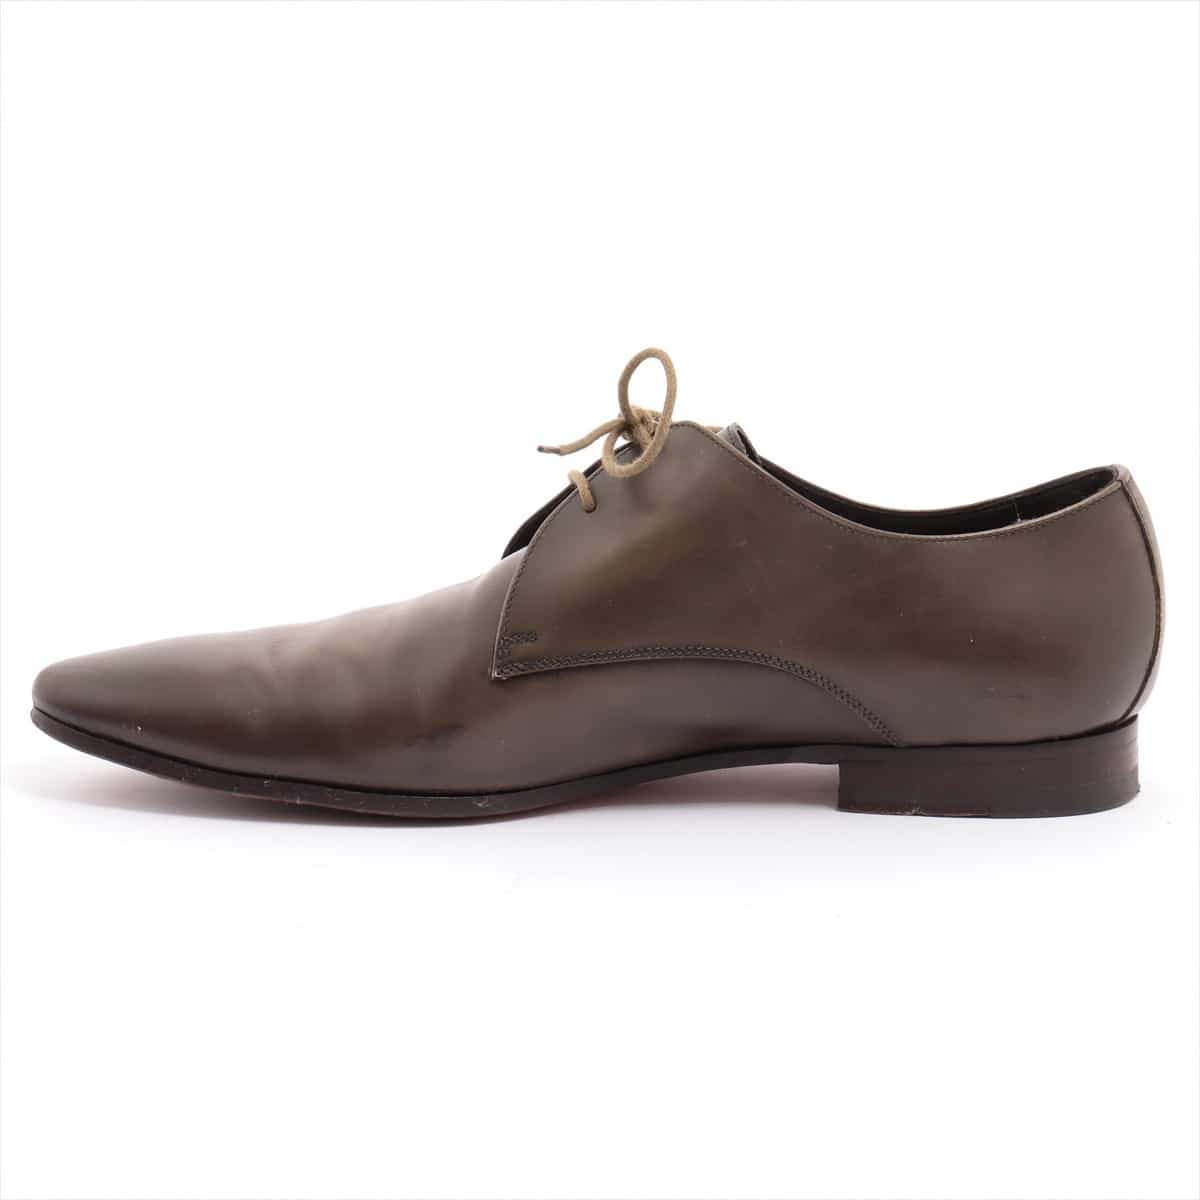 Paul Smith Leather Leather shoes 41.5 Men's Brown